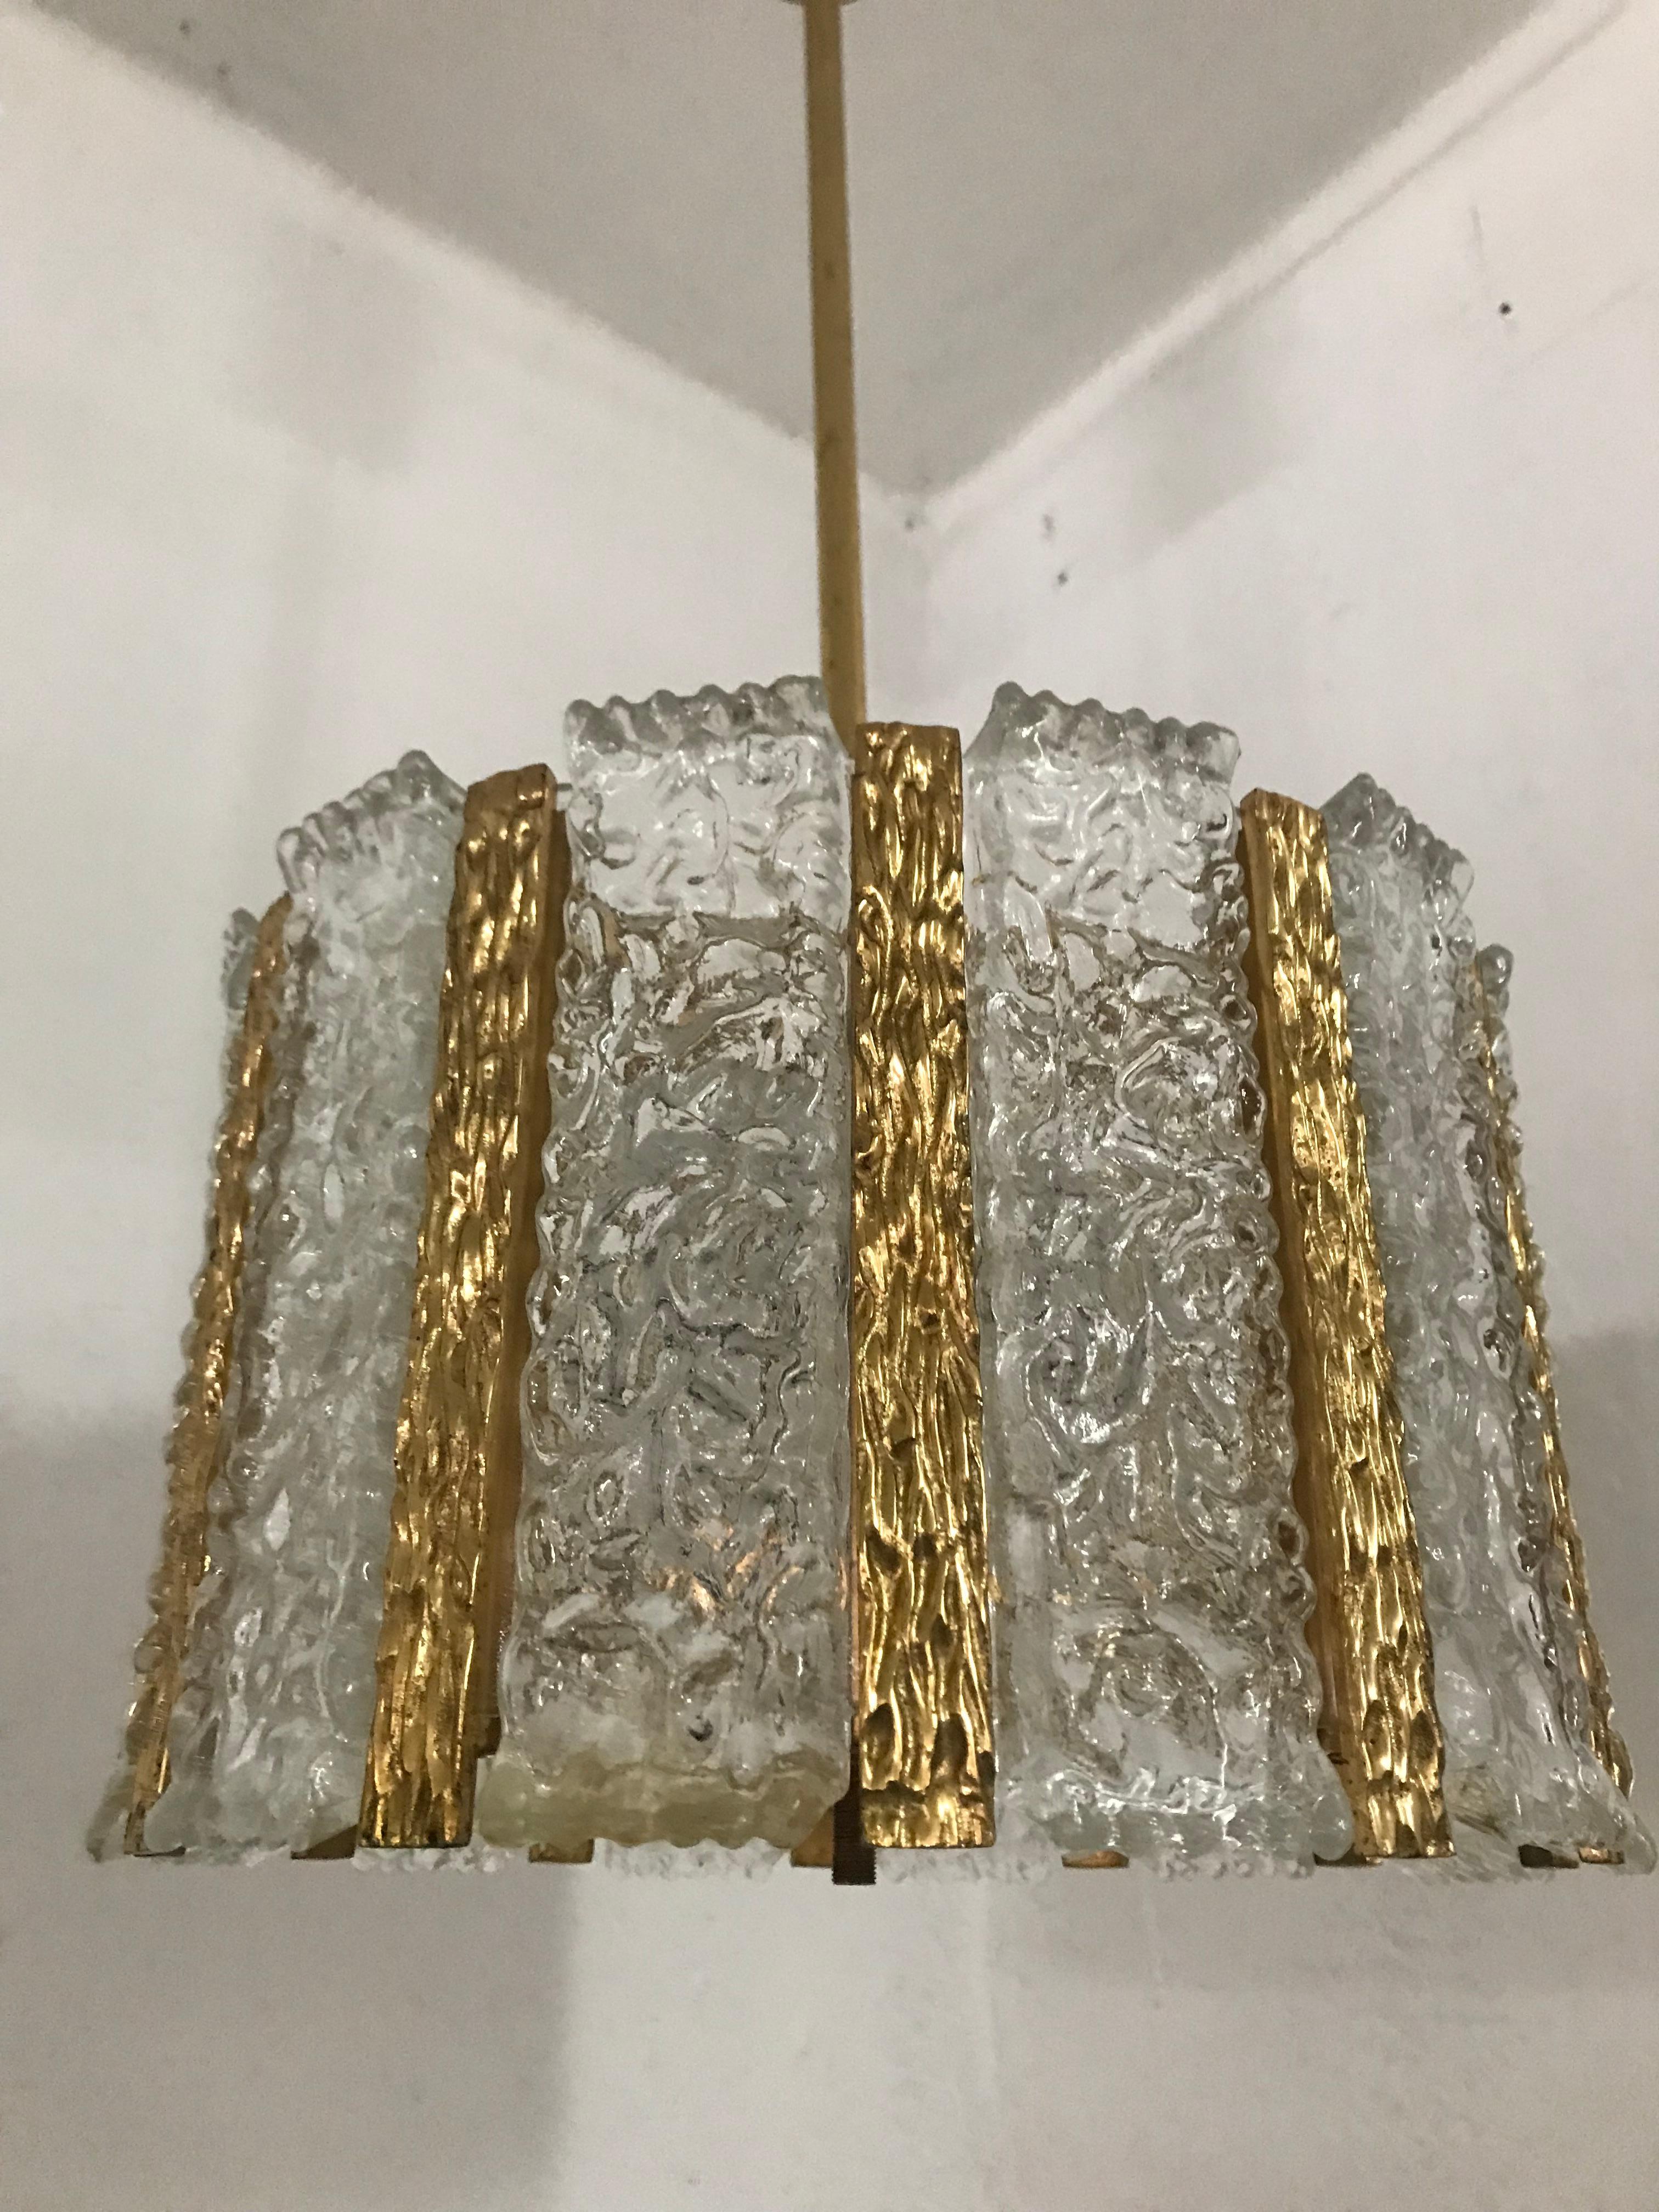 Mid-Century Modern four-light pendant light in frosted glass and gilt brass by J.T. Kalmar, Austria, circa 1960s.

Presents some minor fading in the gilt areas when inspected closely.
 